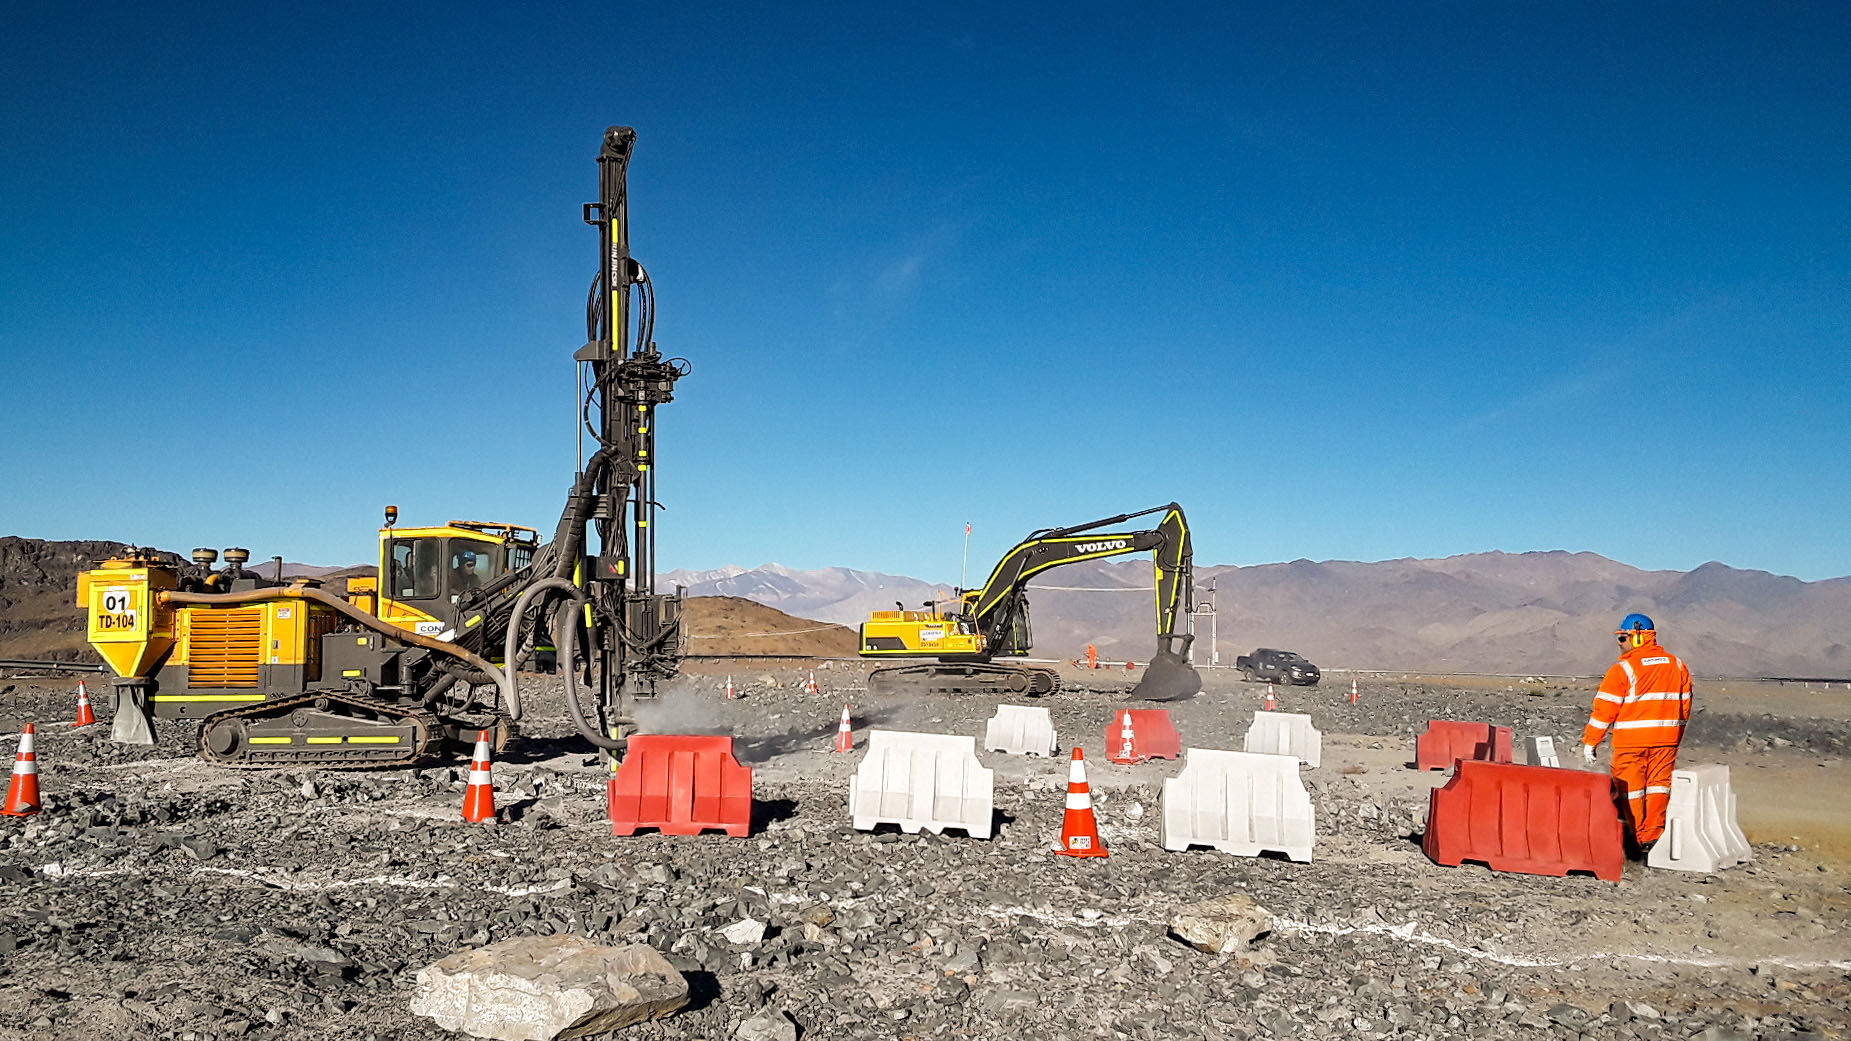 Beginning of excavations. A hydraulic drill being used to create excavation boundaries: more than 4,000 cubic meters of rock will be removed in preparation of the pouring of the concrete foundations for the Giant Magellan Telescope and its support buildings.